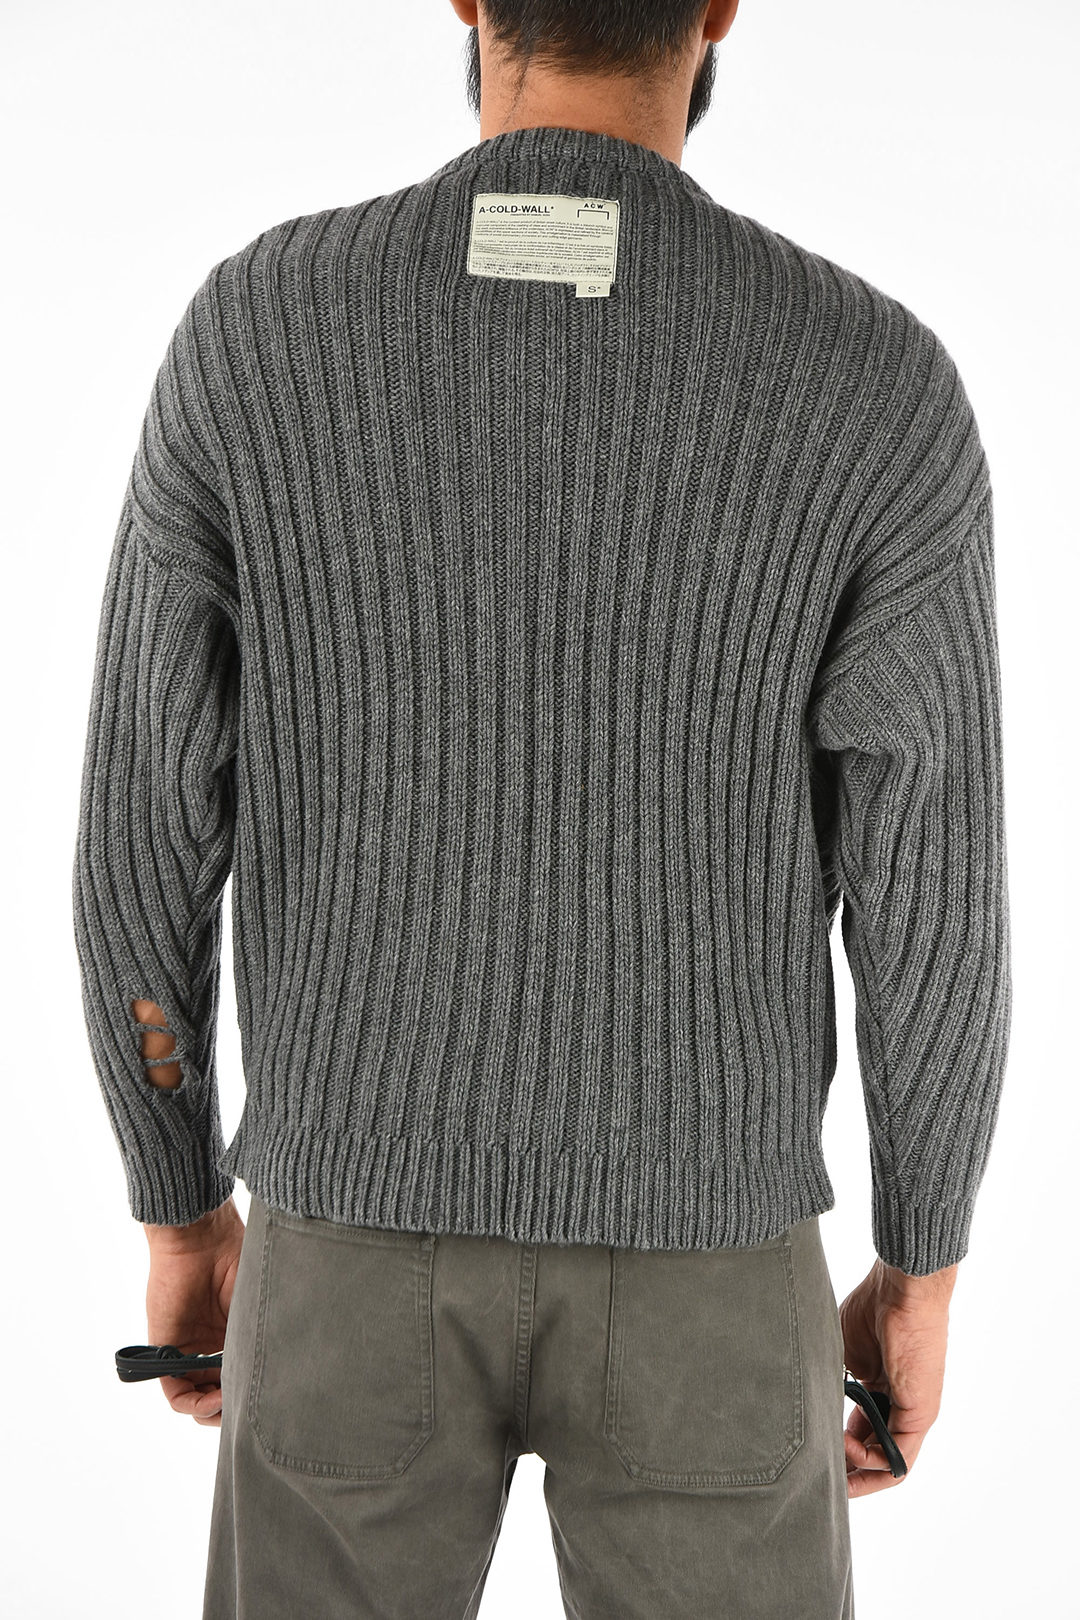 A Cold Wall Distressed Sweater men - Glamood Outlet